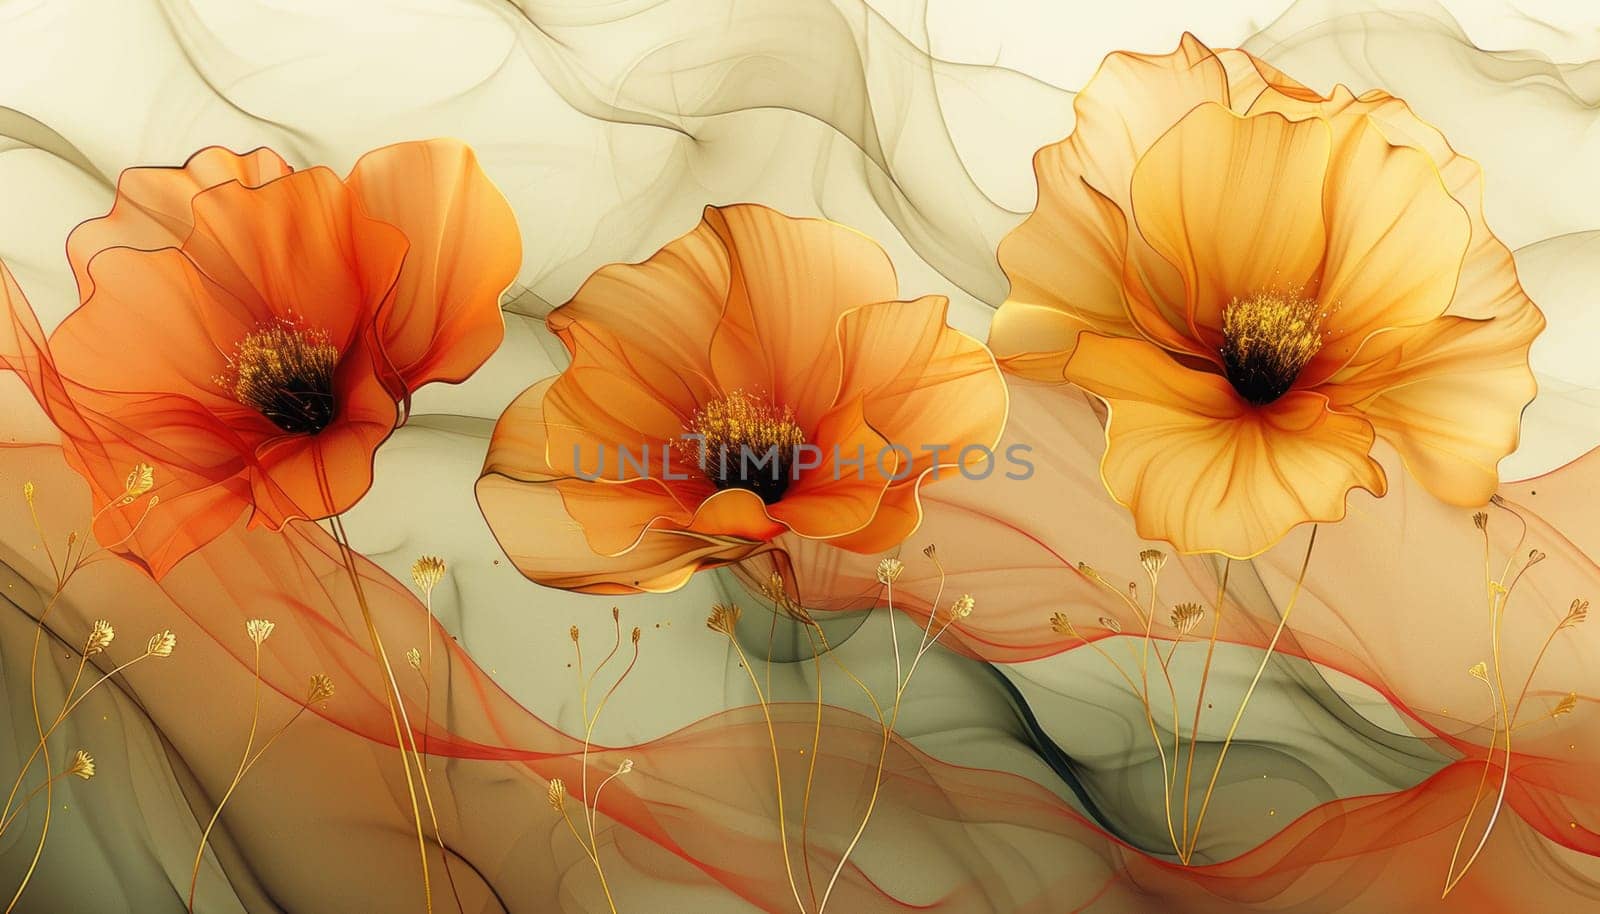 In the artwork, three vibrant orange flowers stand out on a pristine white background, highlighting their beauty